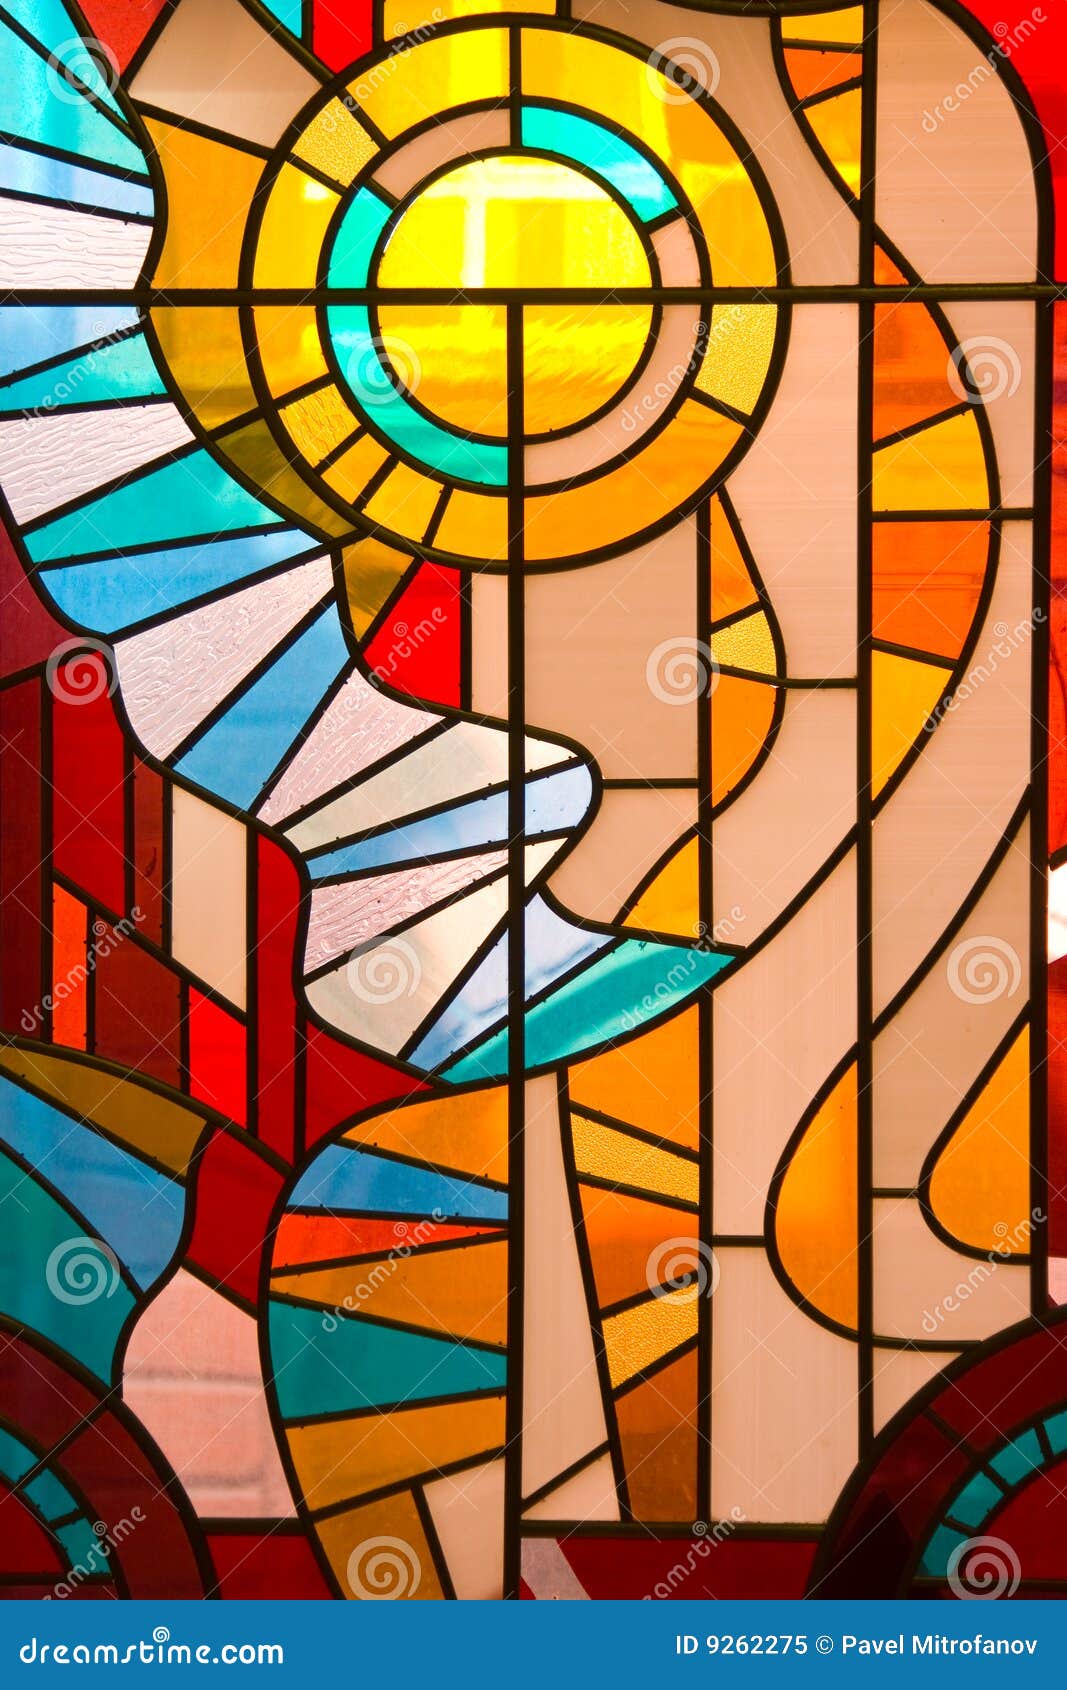 stained glass clipart free - photo #32